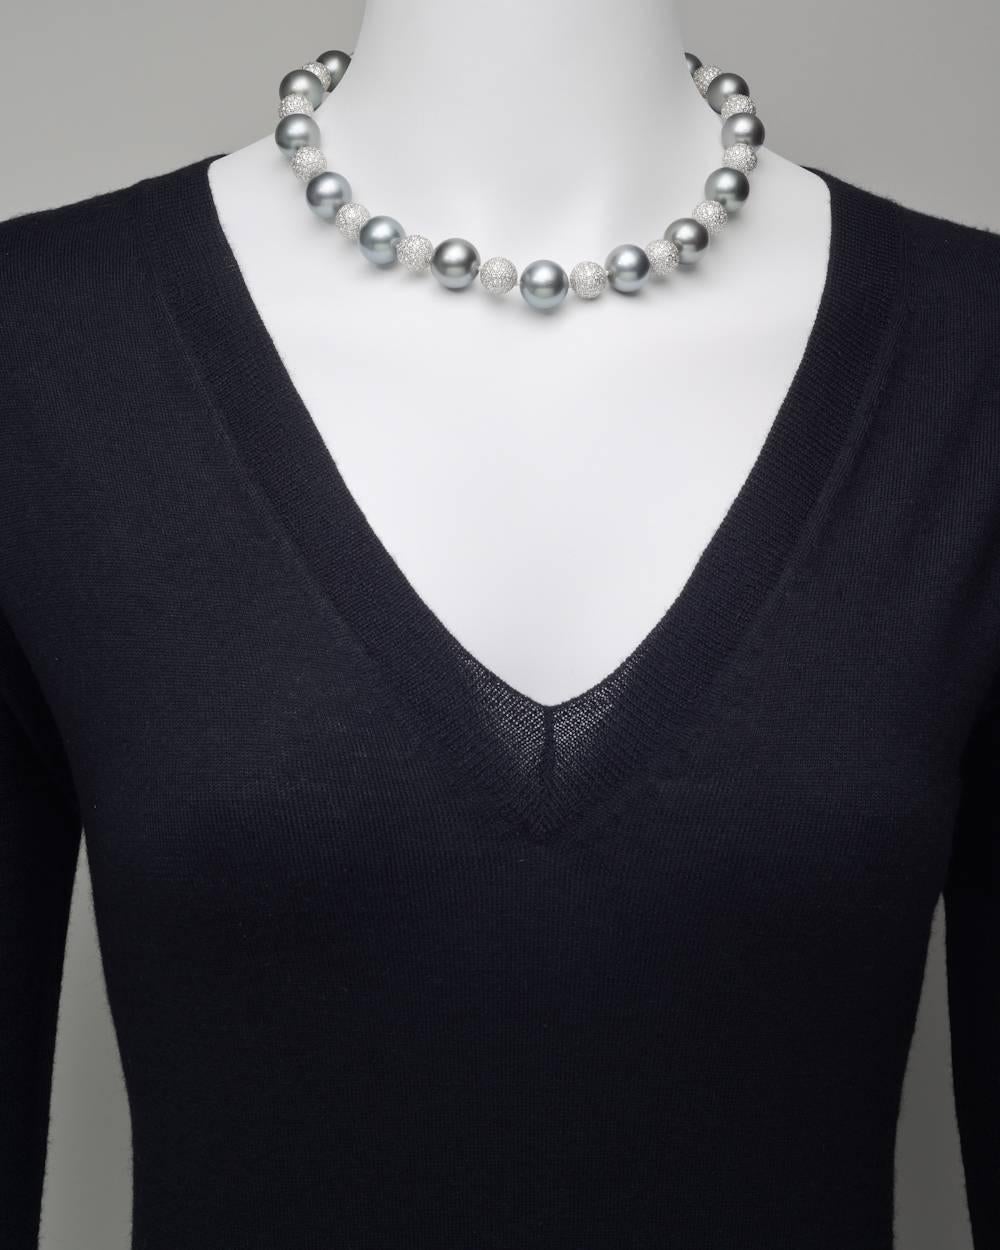 Tahitian pearl and pavé diamond ball necklace, composed of seventeen fine Tahitian pearls ranging from 13.3-14.8mm in size with 29.55 total carats of round brilliant cut diamonds, and strung on a hand-knotted silk cord with a hidden screw-in ball